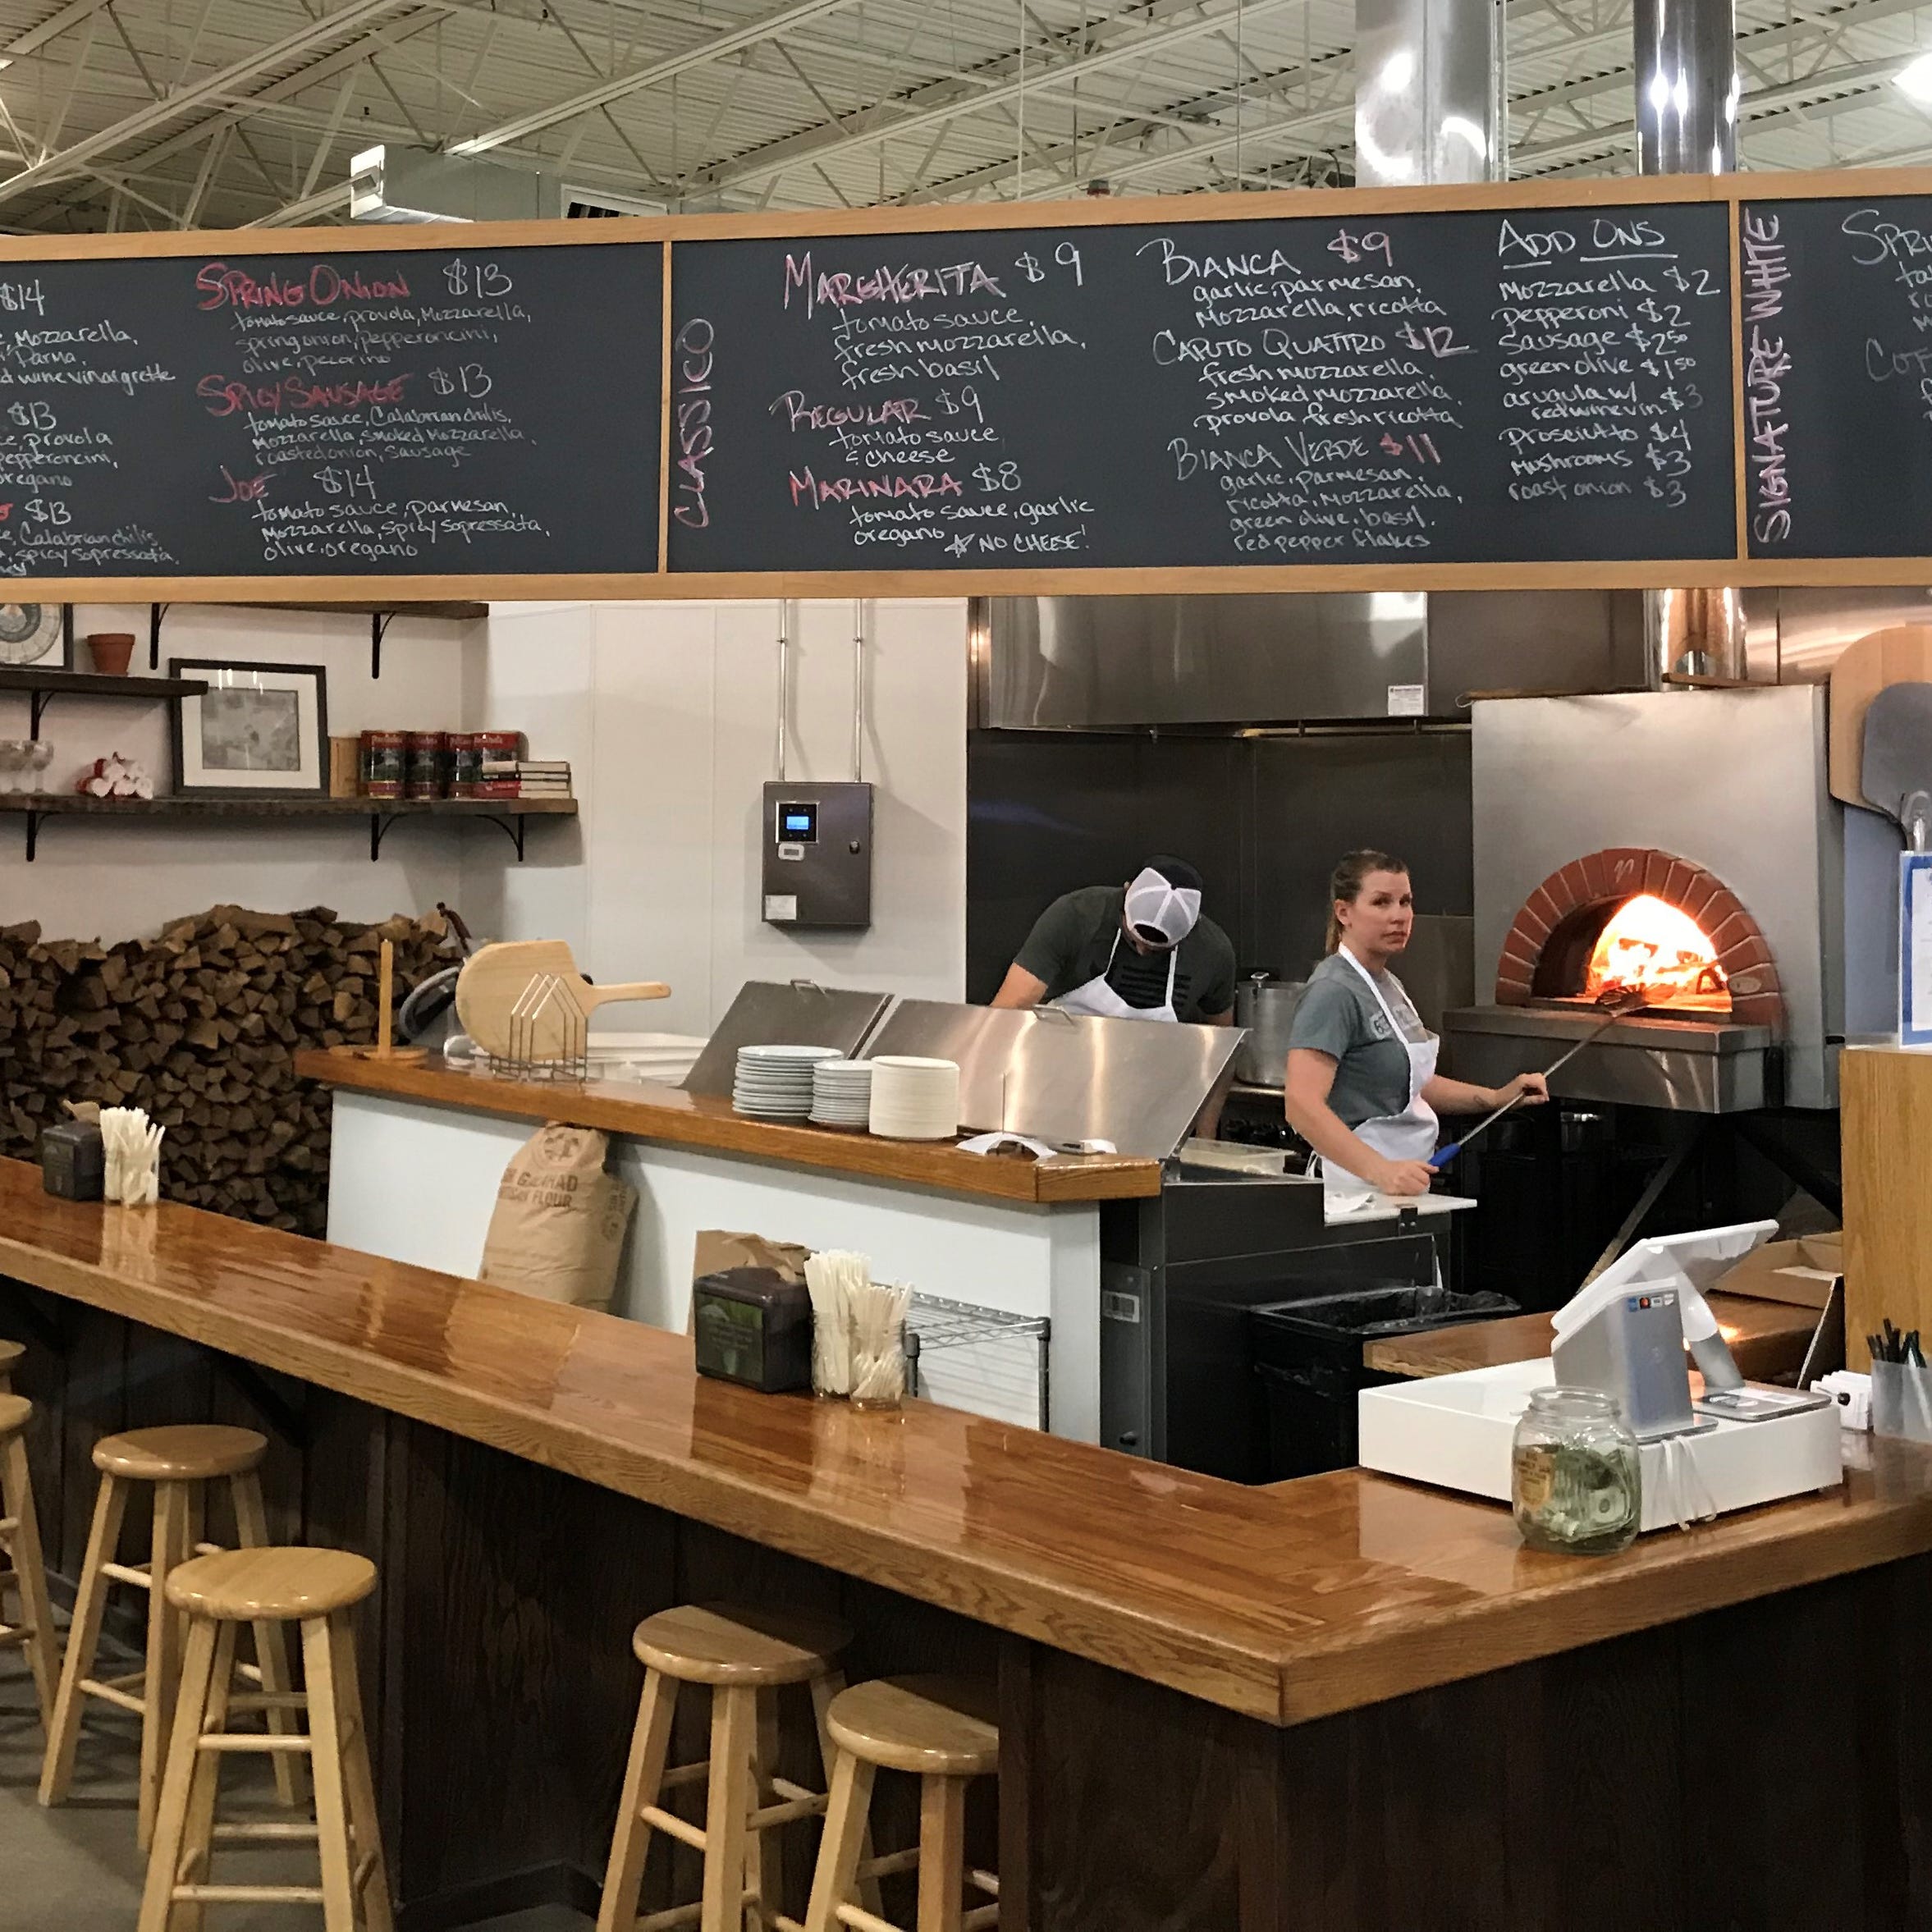 Shaun and Jessica Wolf, owners of Artisan and Oak located in the Markets at Hanover, will be opening a new restaurant downtown at 40 Broadway.